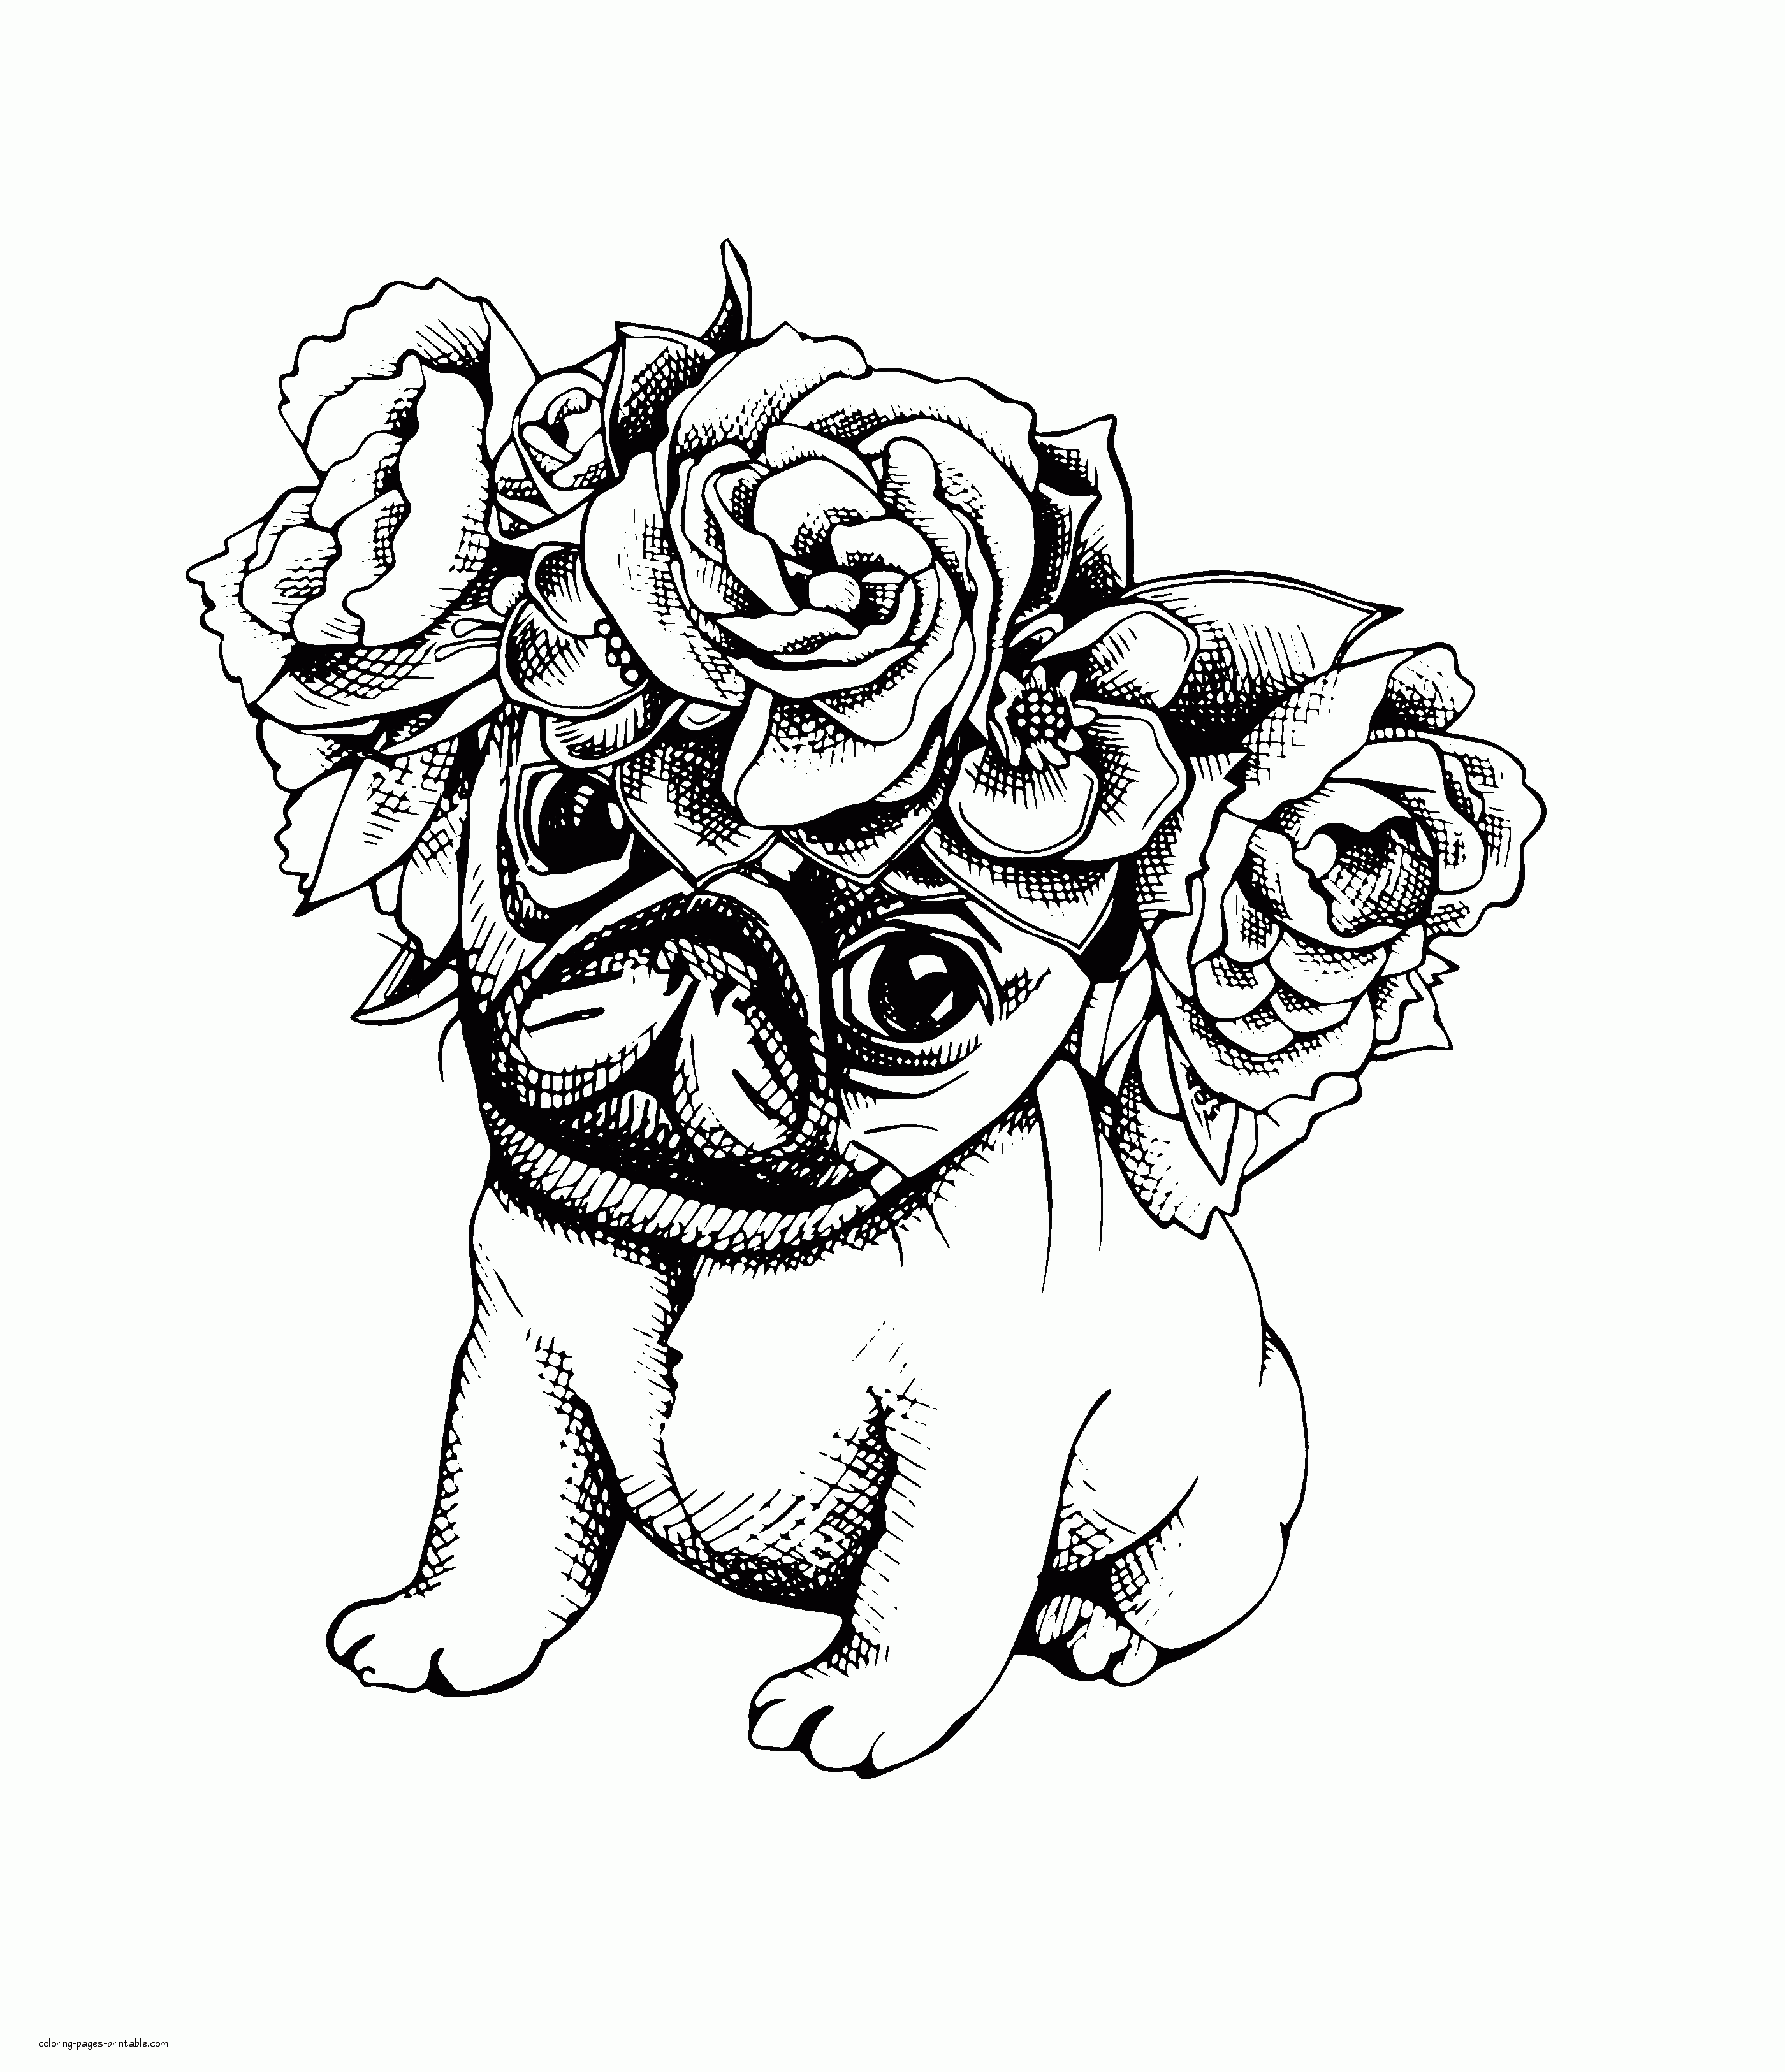 Animal Coloring Pages For Adults. Puppy || COLORING-PAGES-PRINTABLE.COM